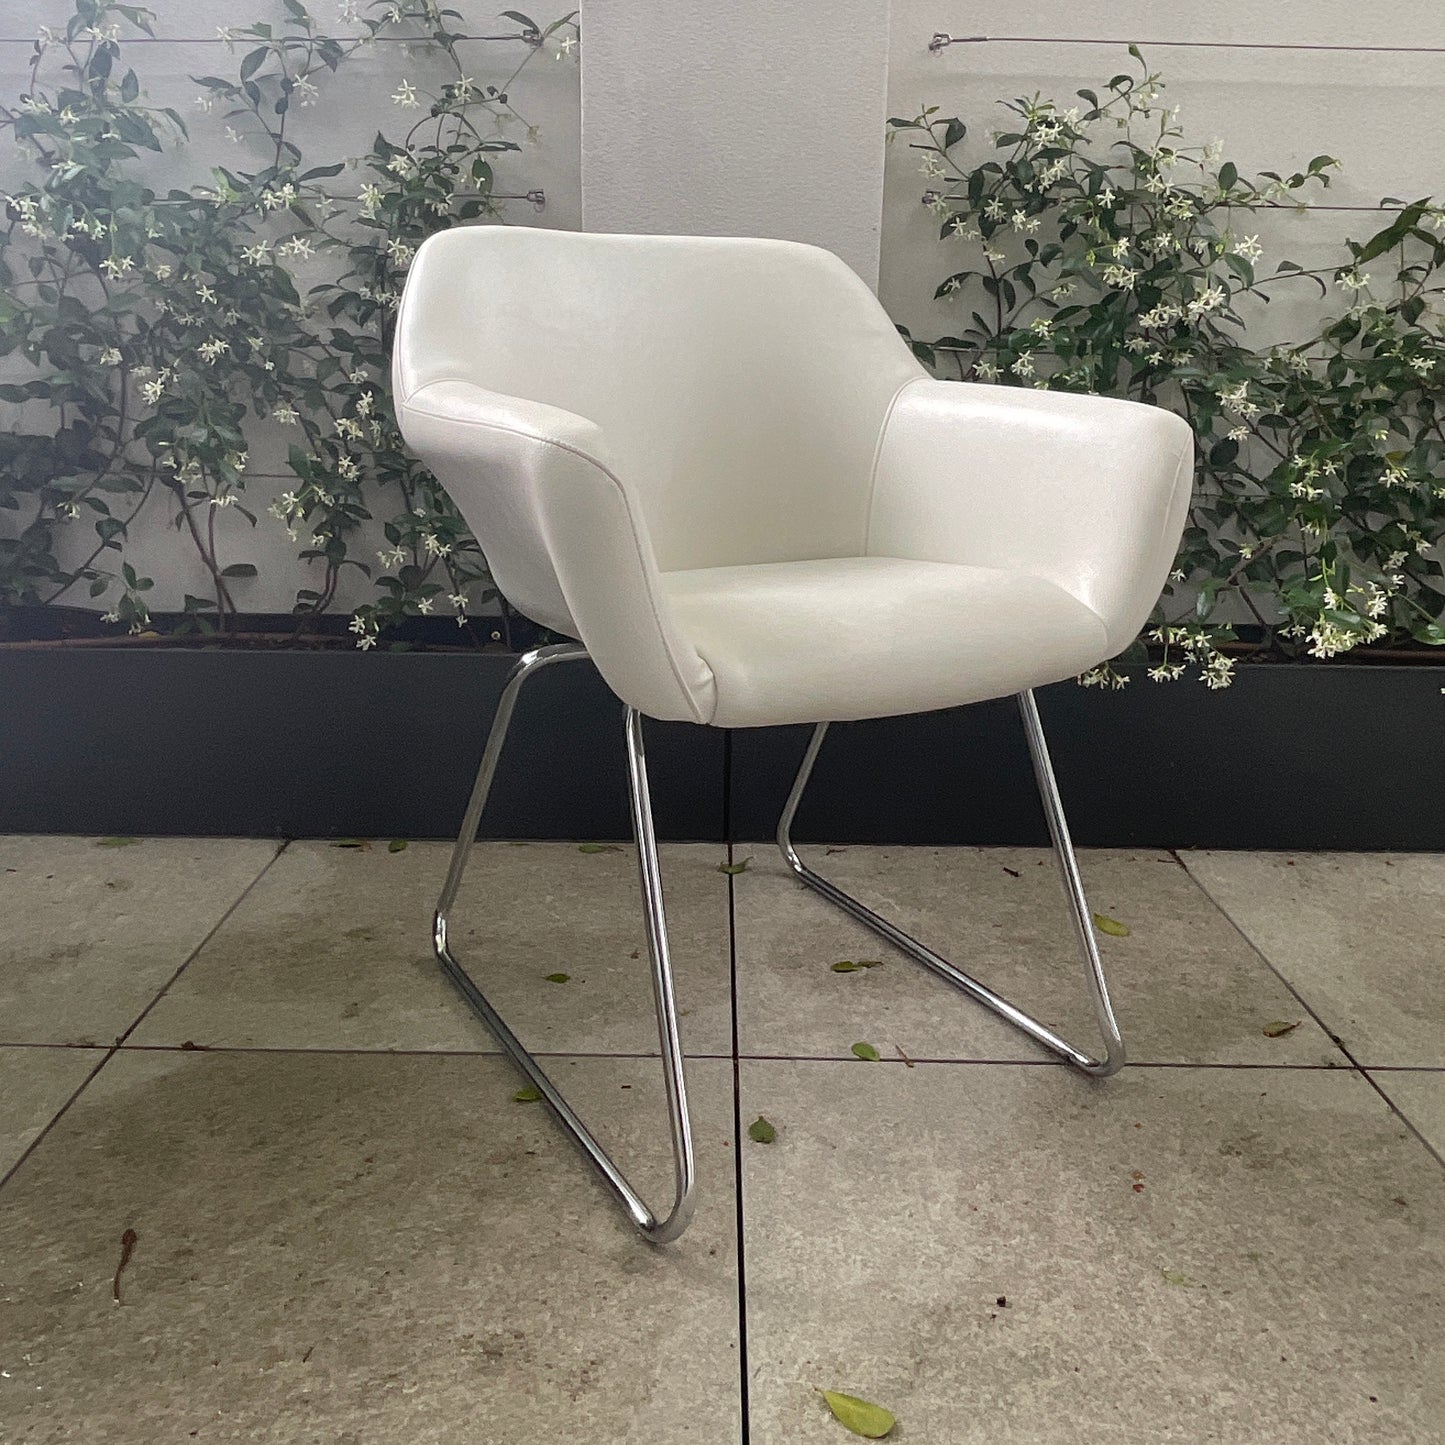 Set of SIX Hobnob Chairs by Sebel (2 sets available)